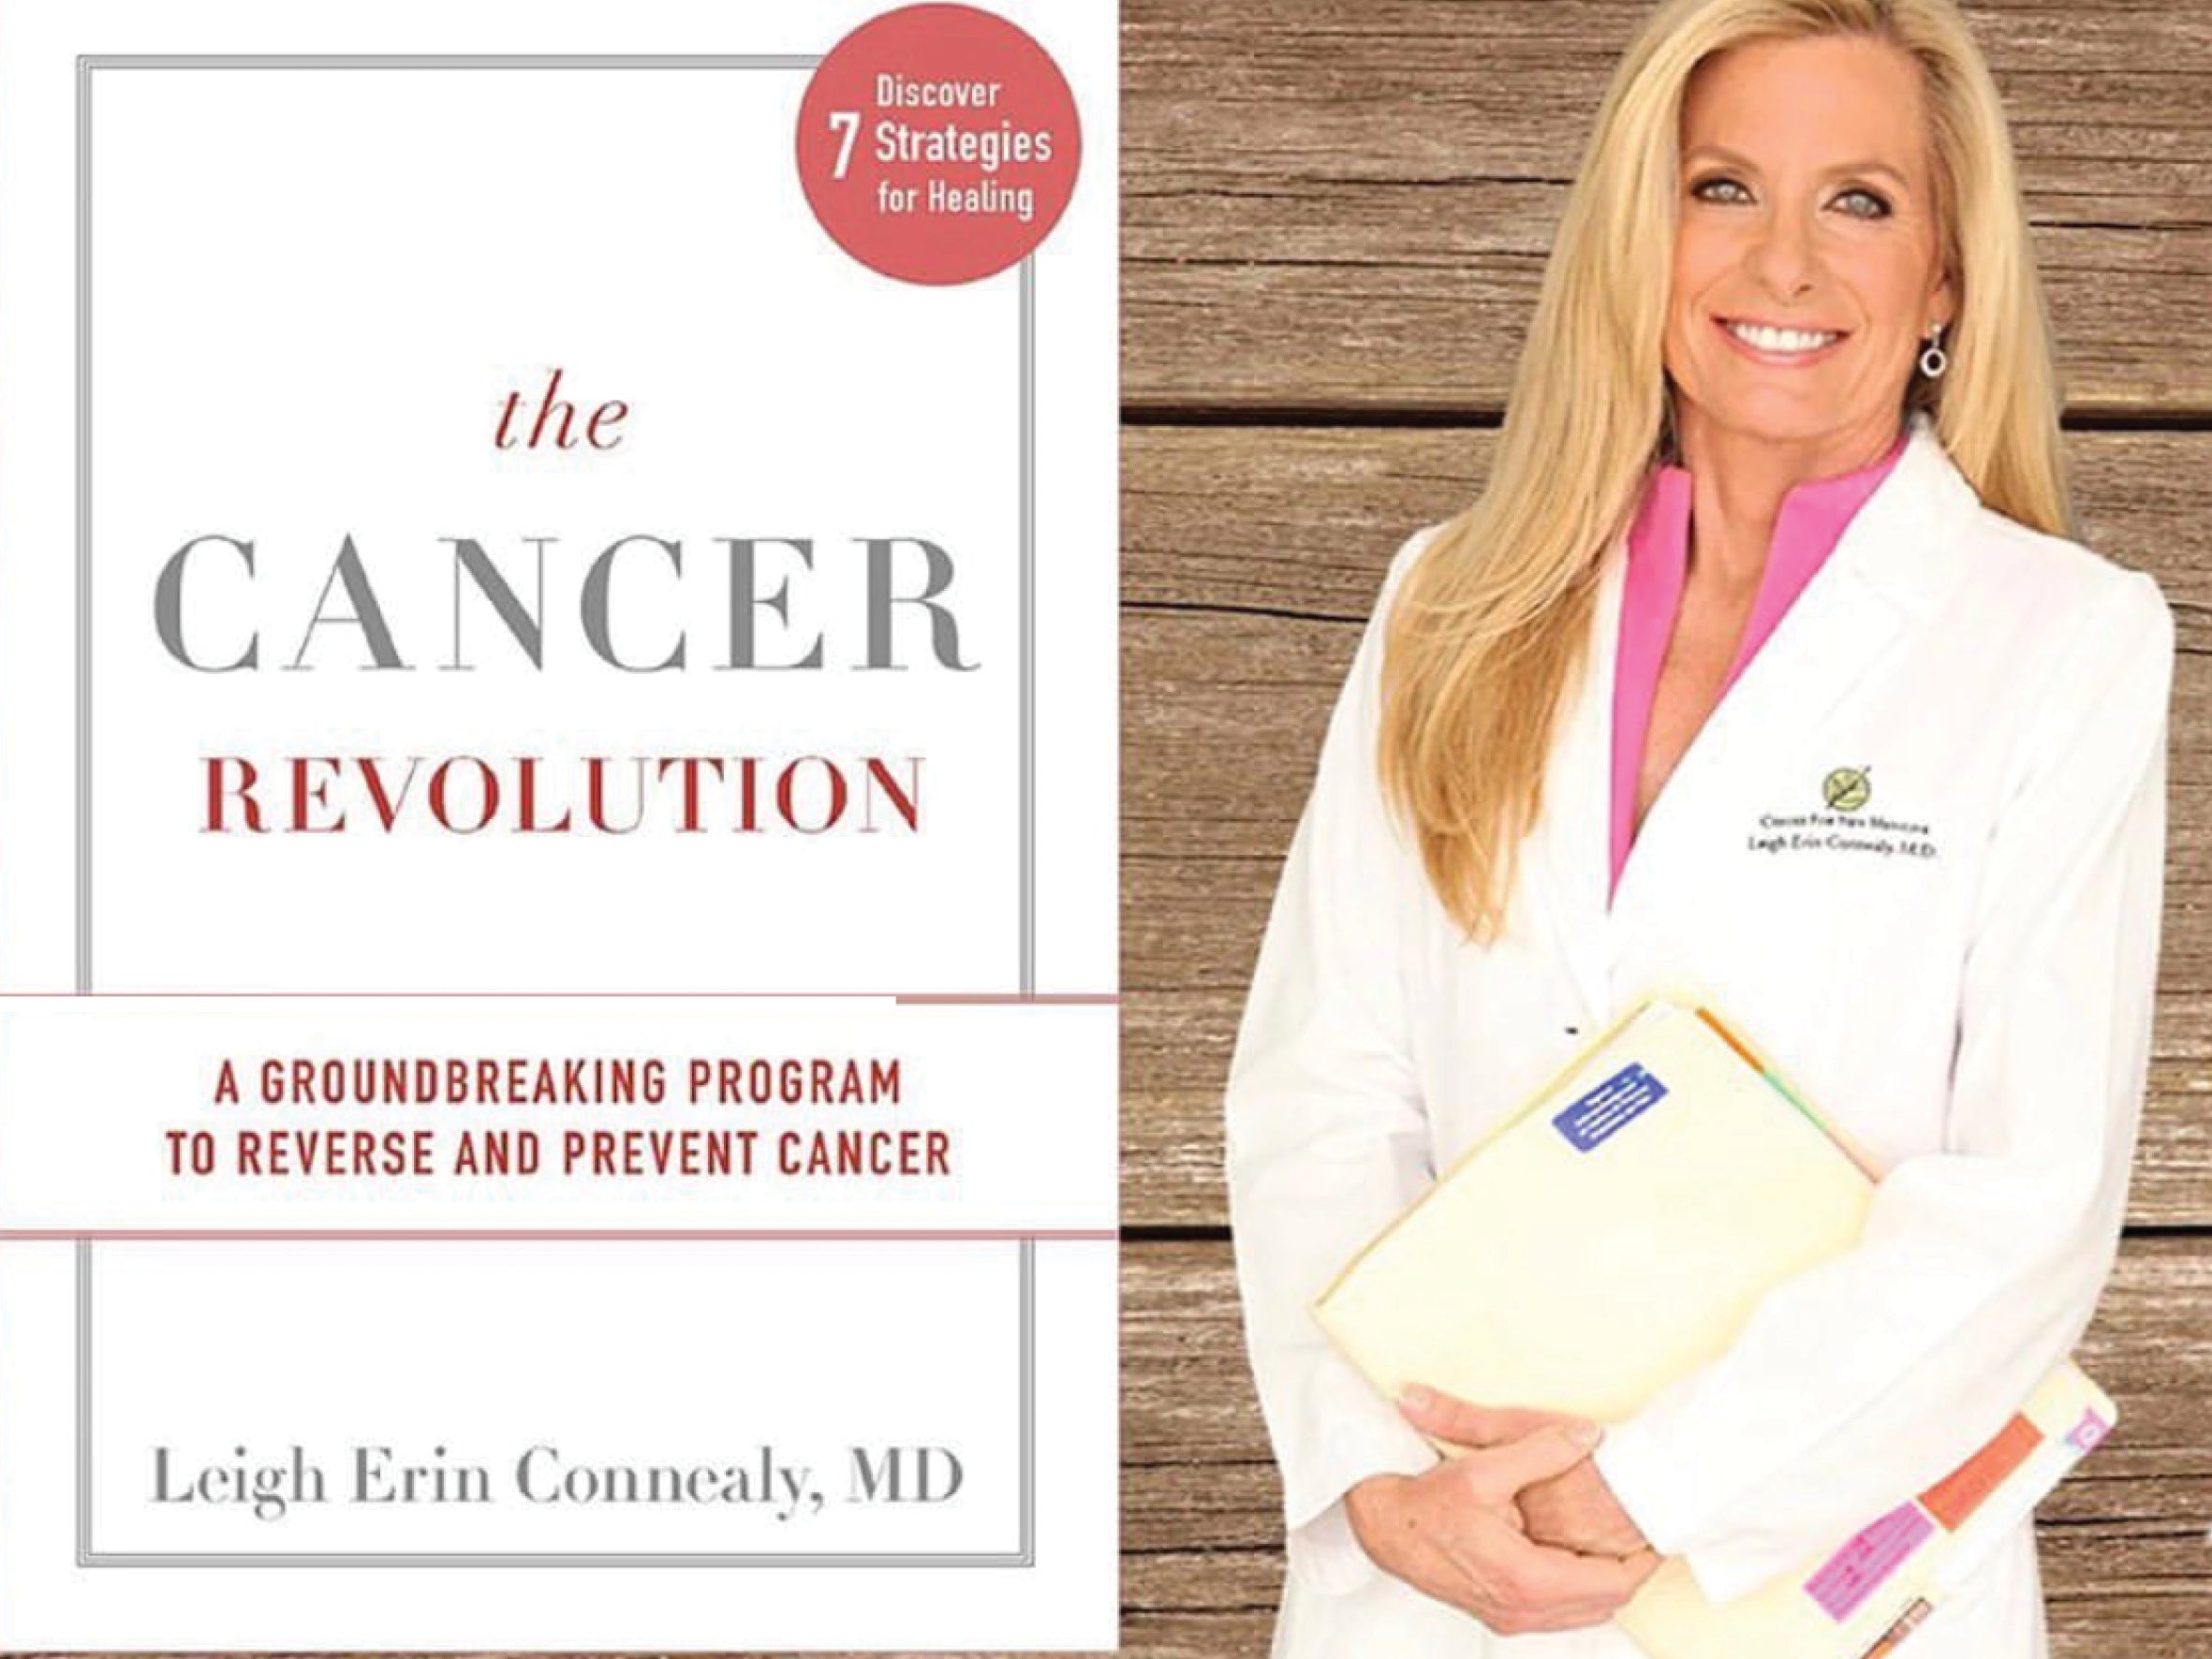 Dr. Connealy (portrait) is the author of “The Cancer Revolution” (book cover shown)